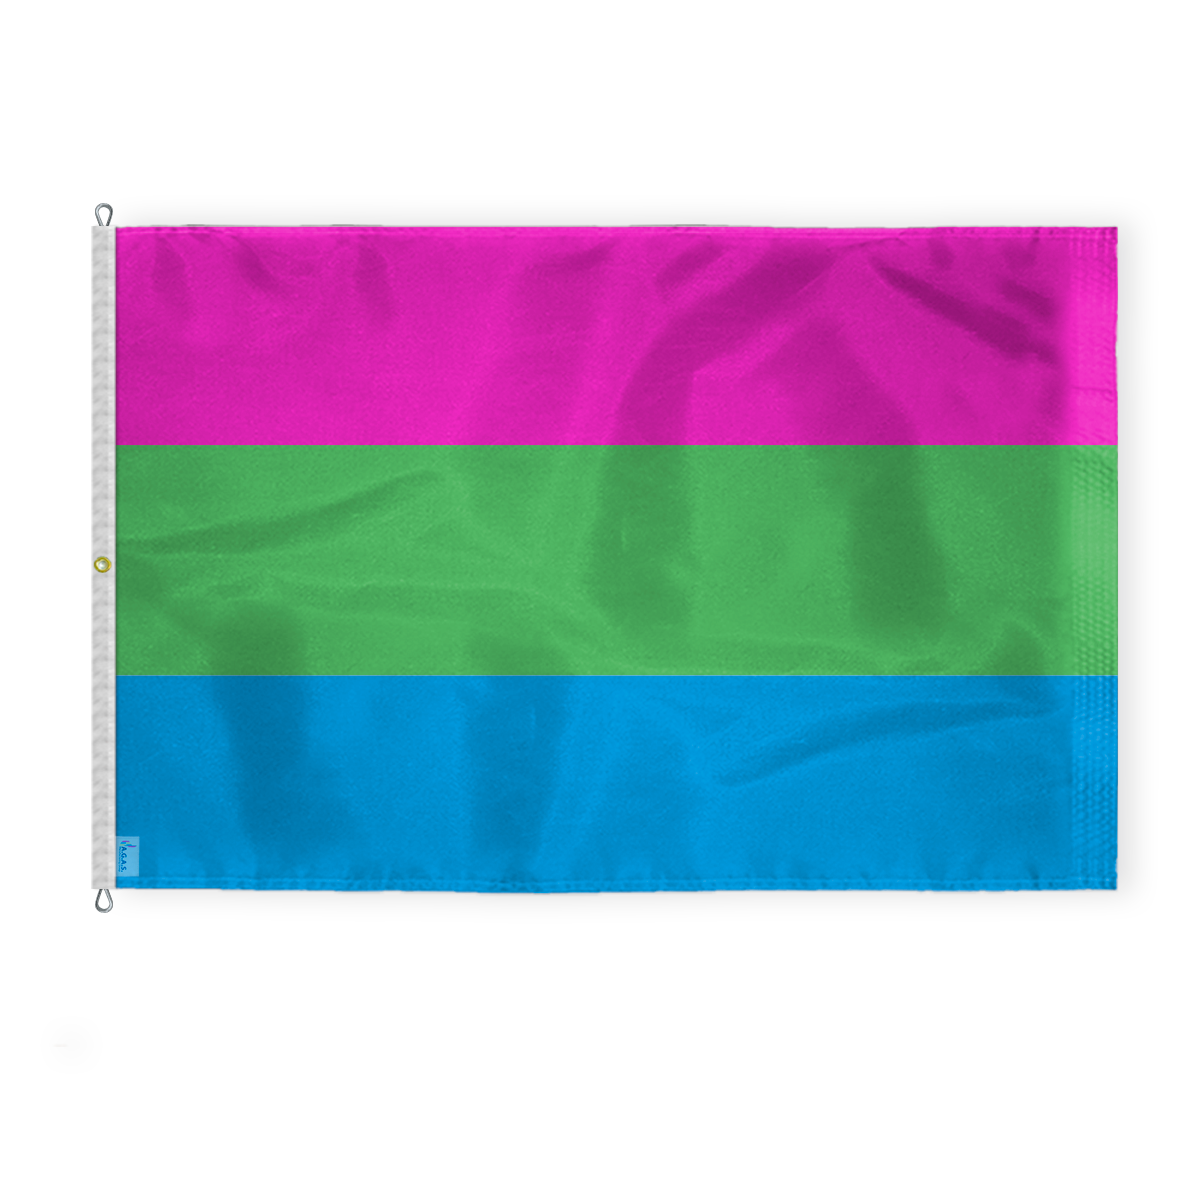 AGAS Large Polysexual Pride Flag 10x15 Ft